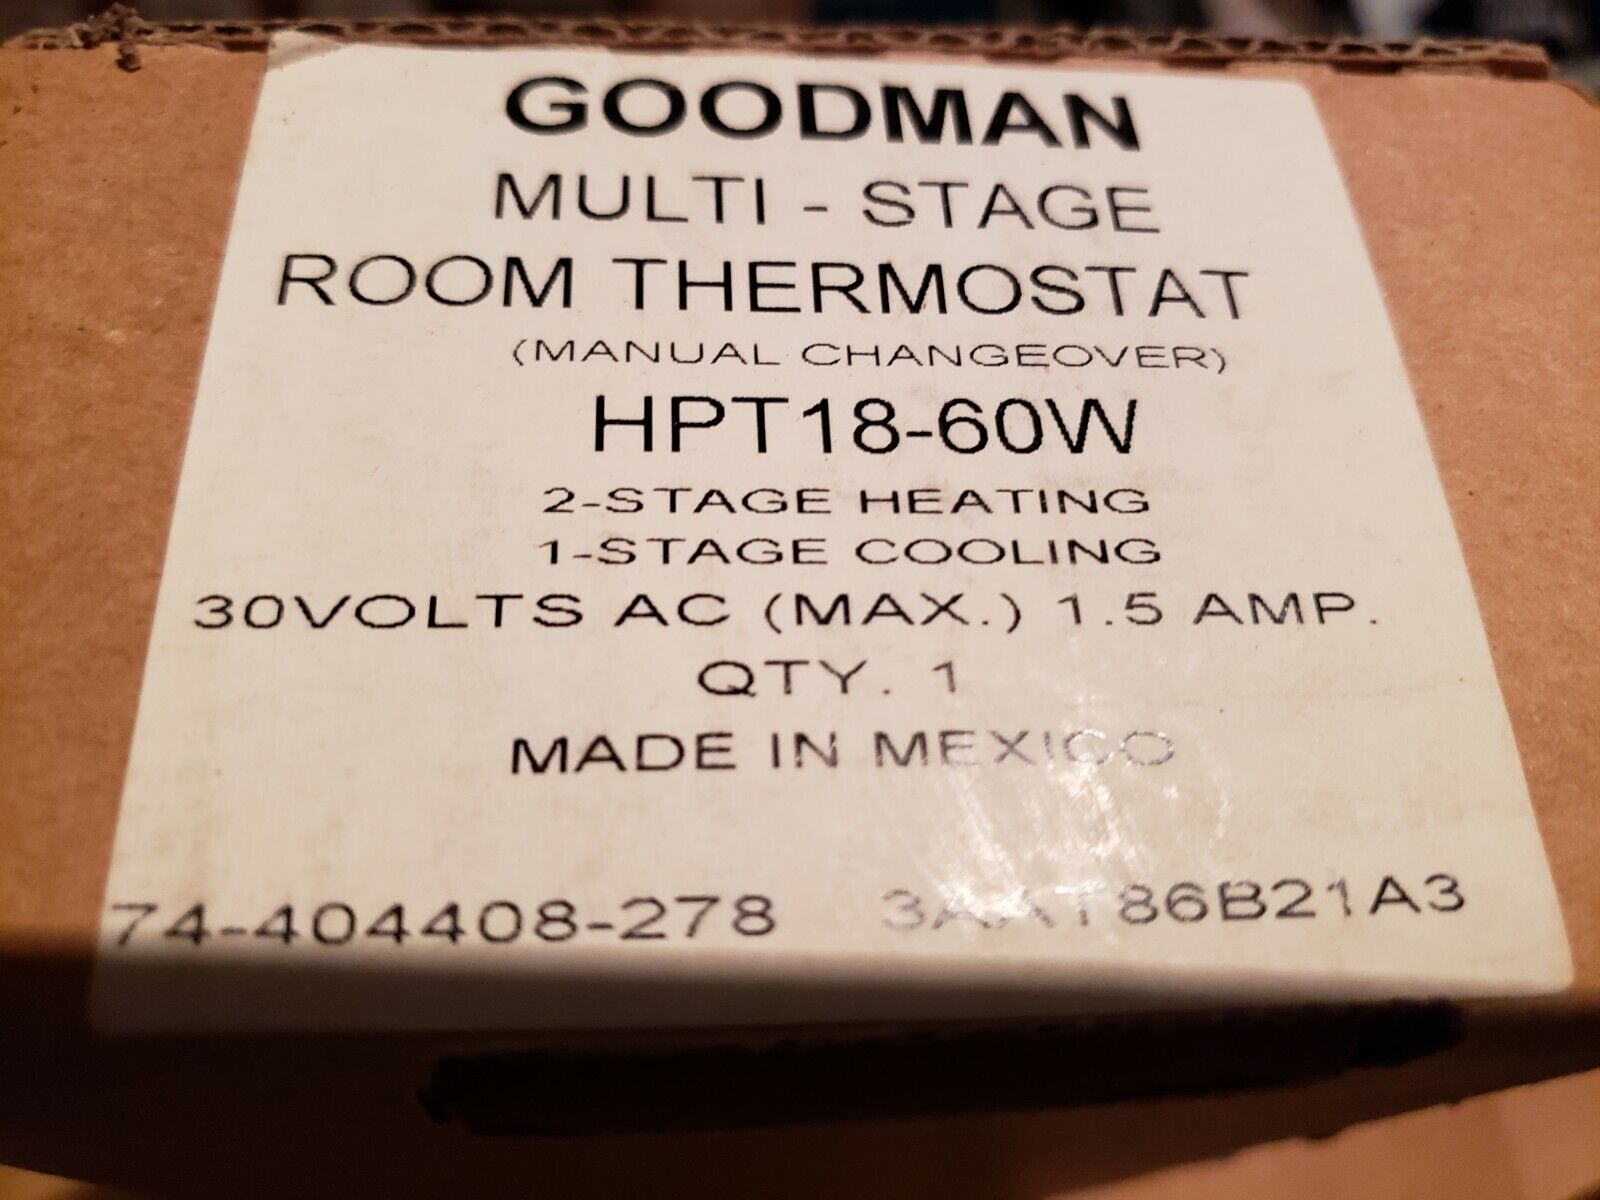 New Goodman HPT18-60w Heat Pump Thermostat multi-stage Manual Changeover 